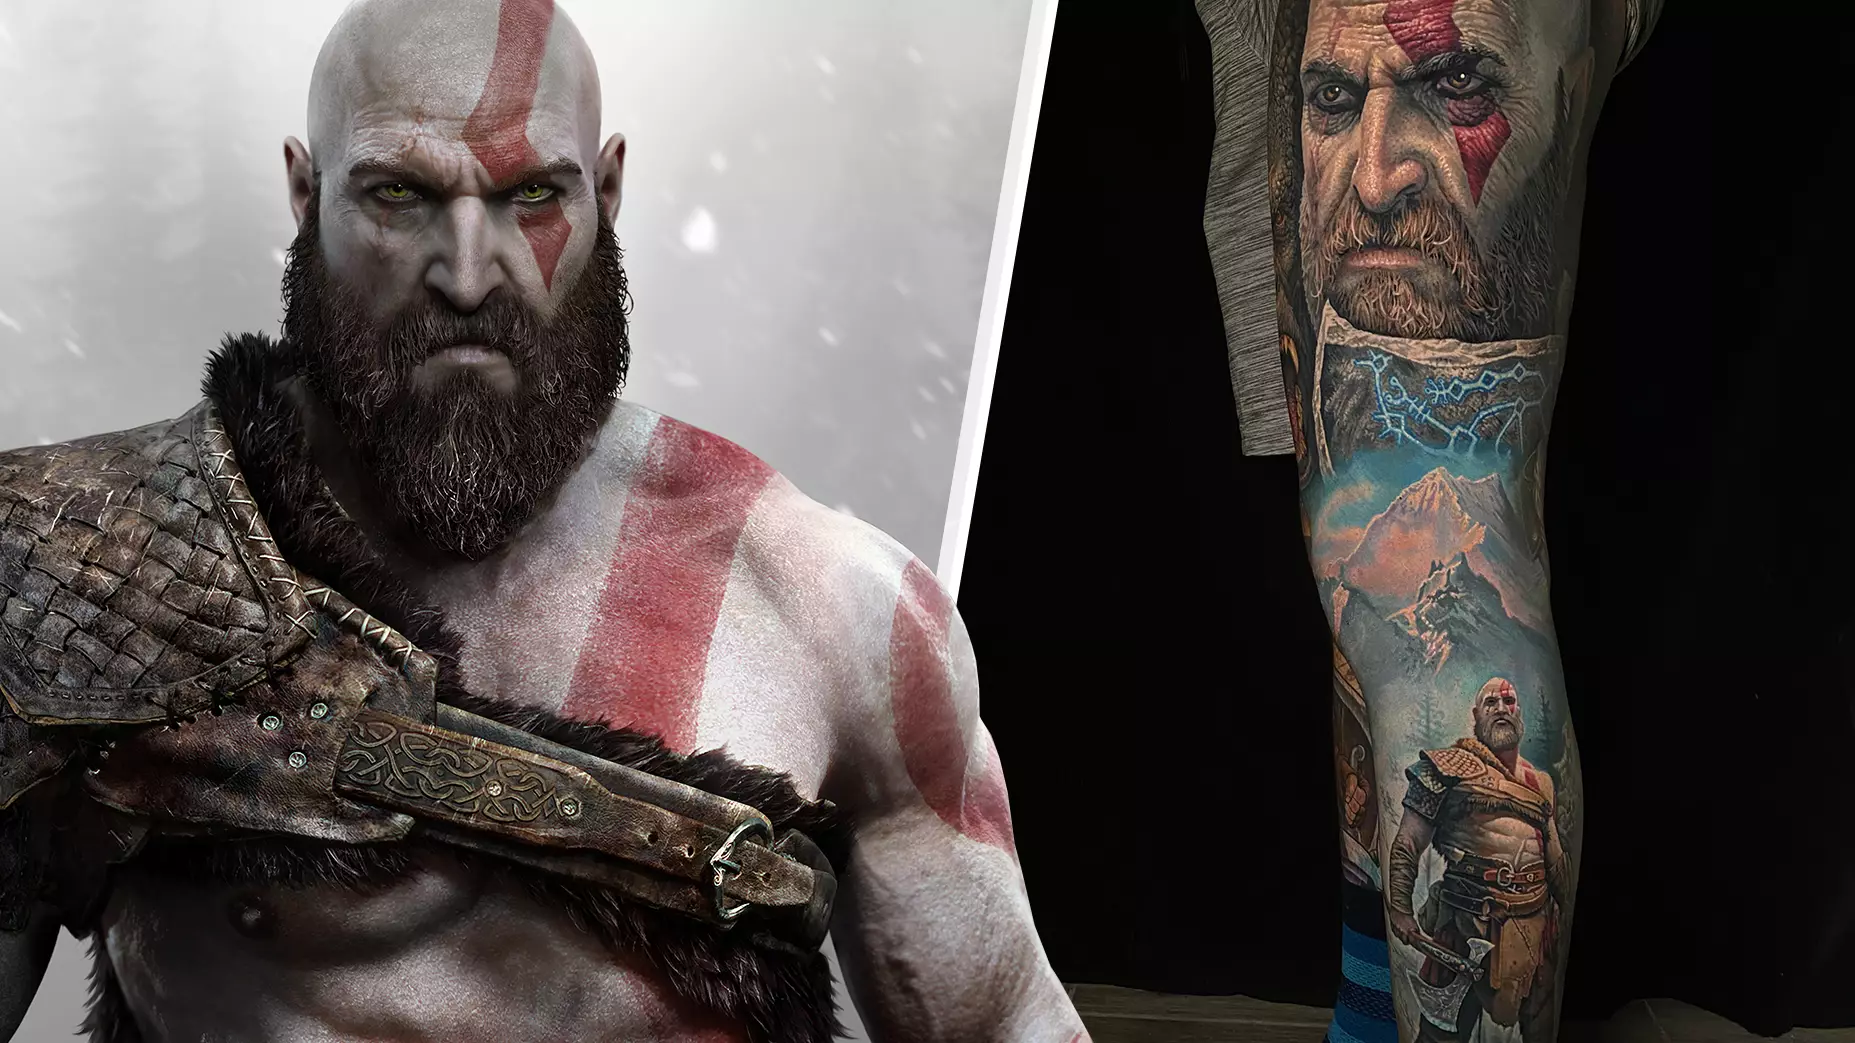 This ‘God Of War’ Leg Sleeve Tattoo Is An Incredible Piece Of Art